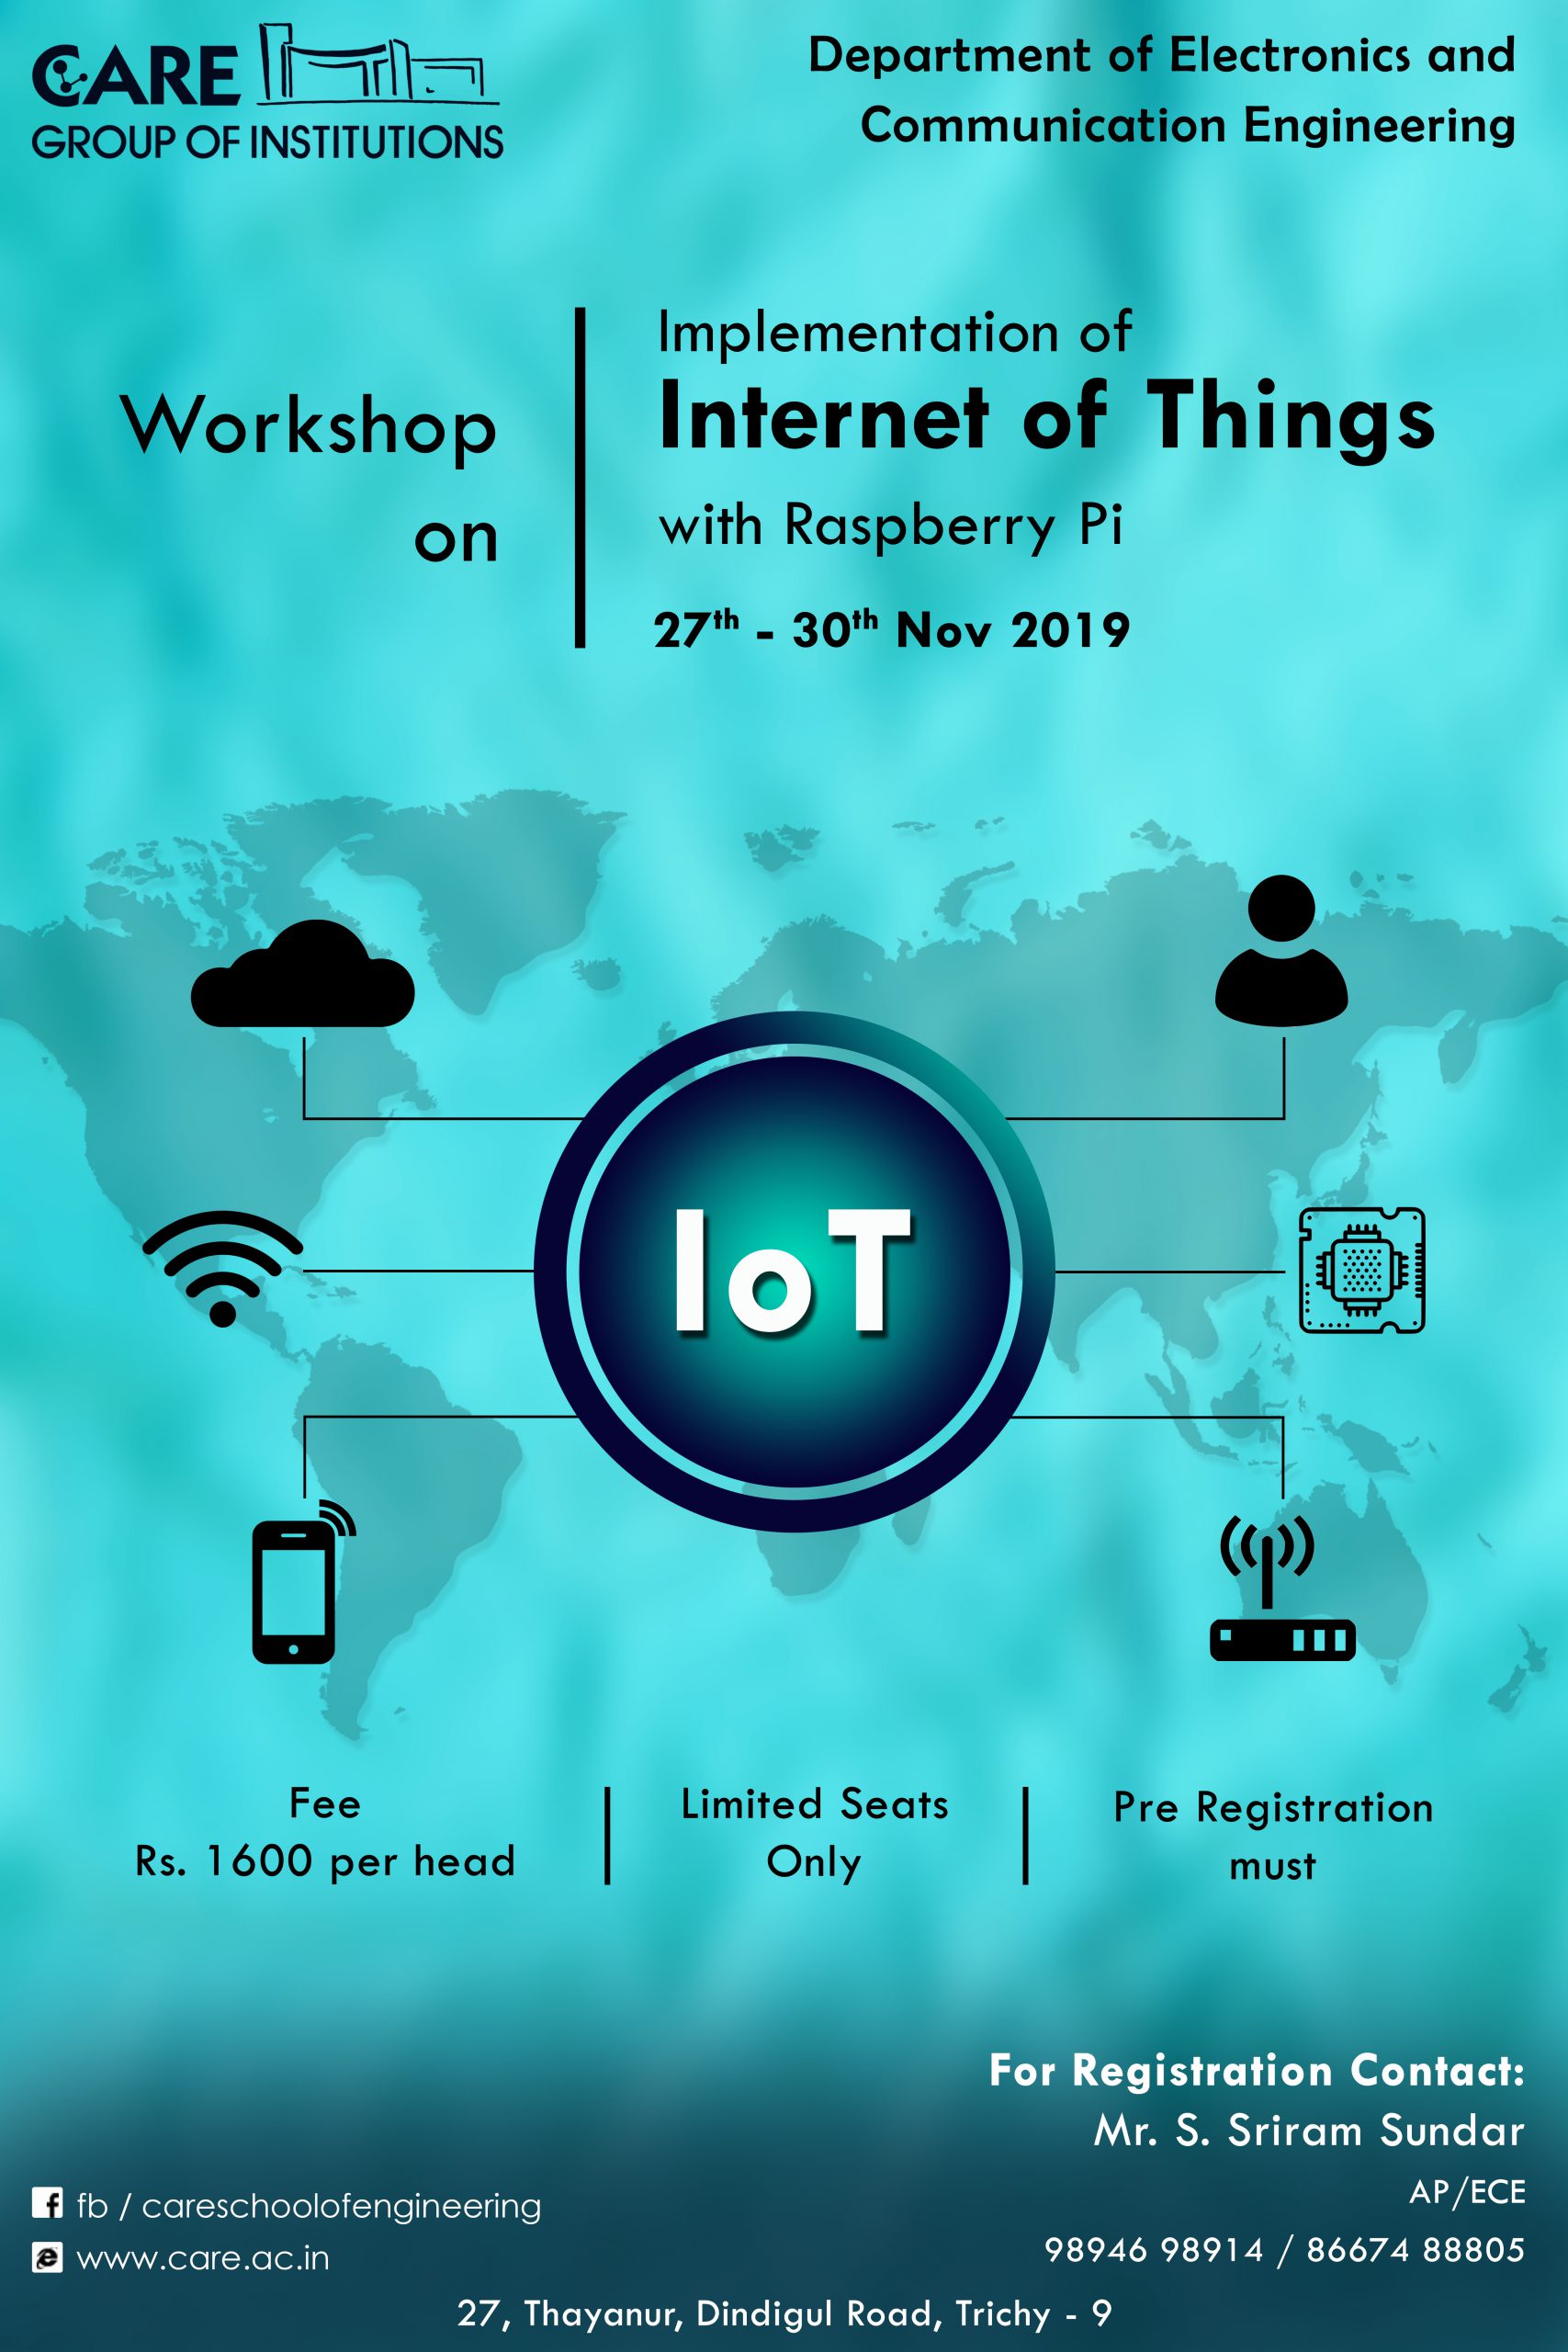 Implementation of IoT with Raspberry Pi